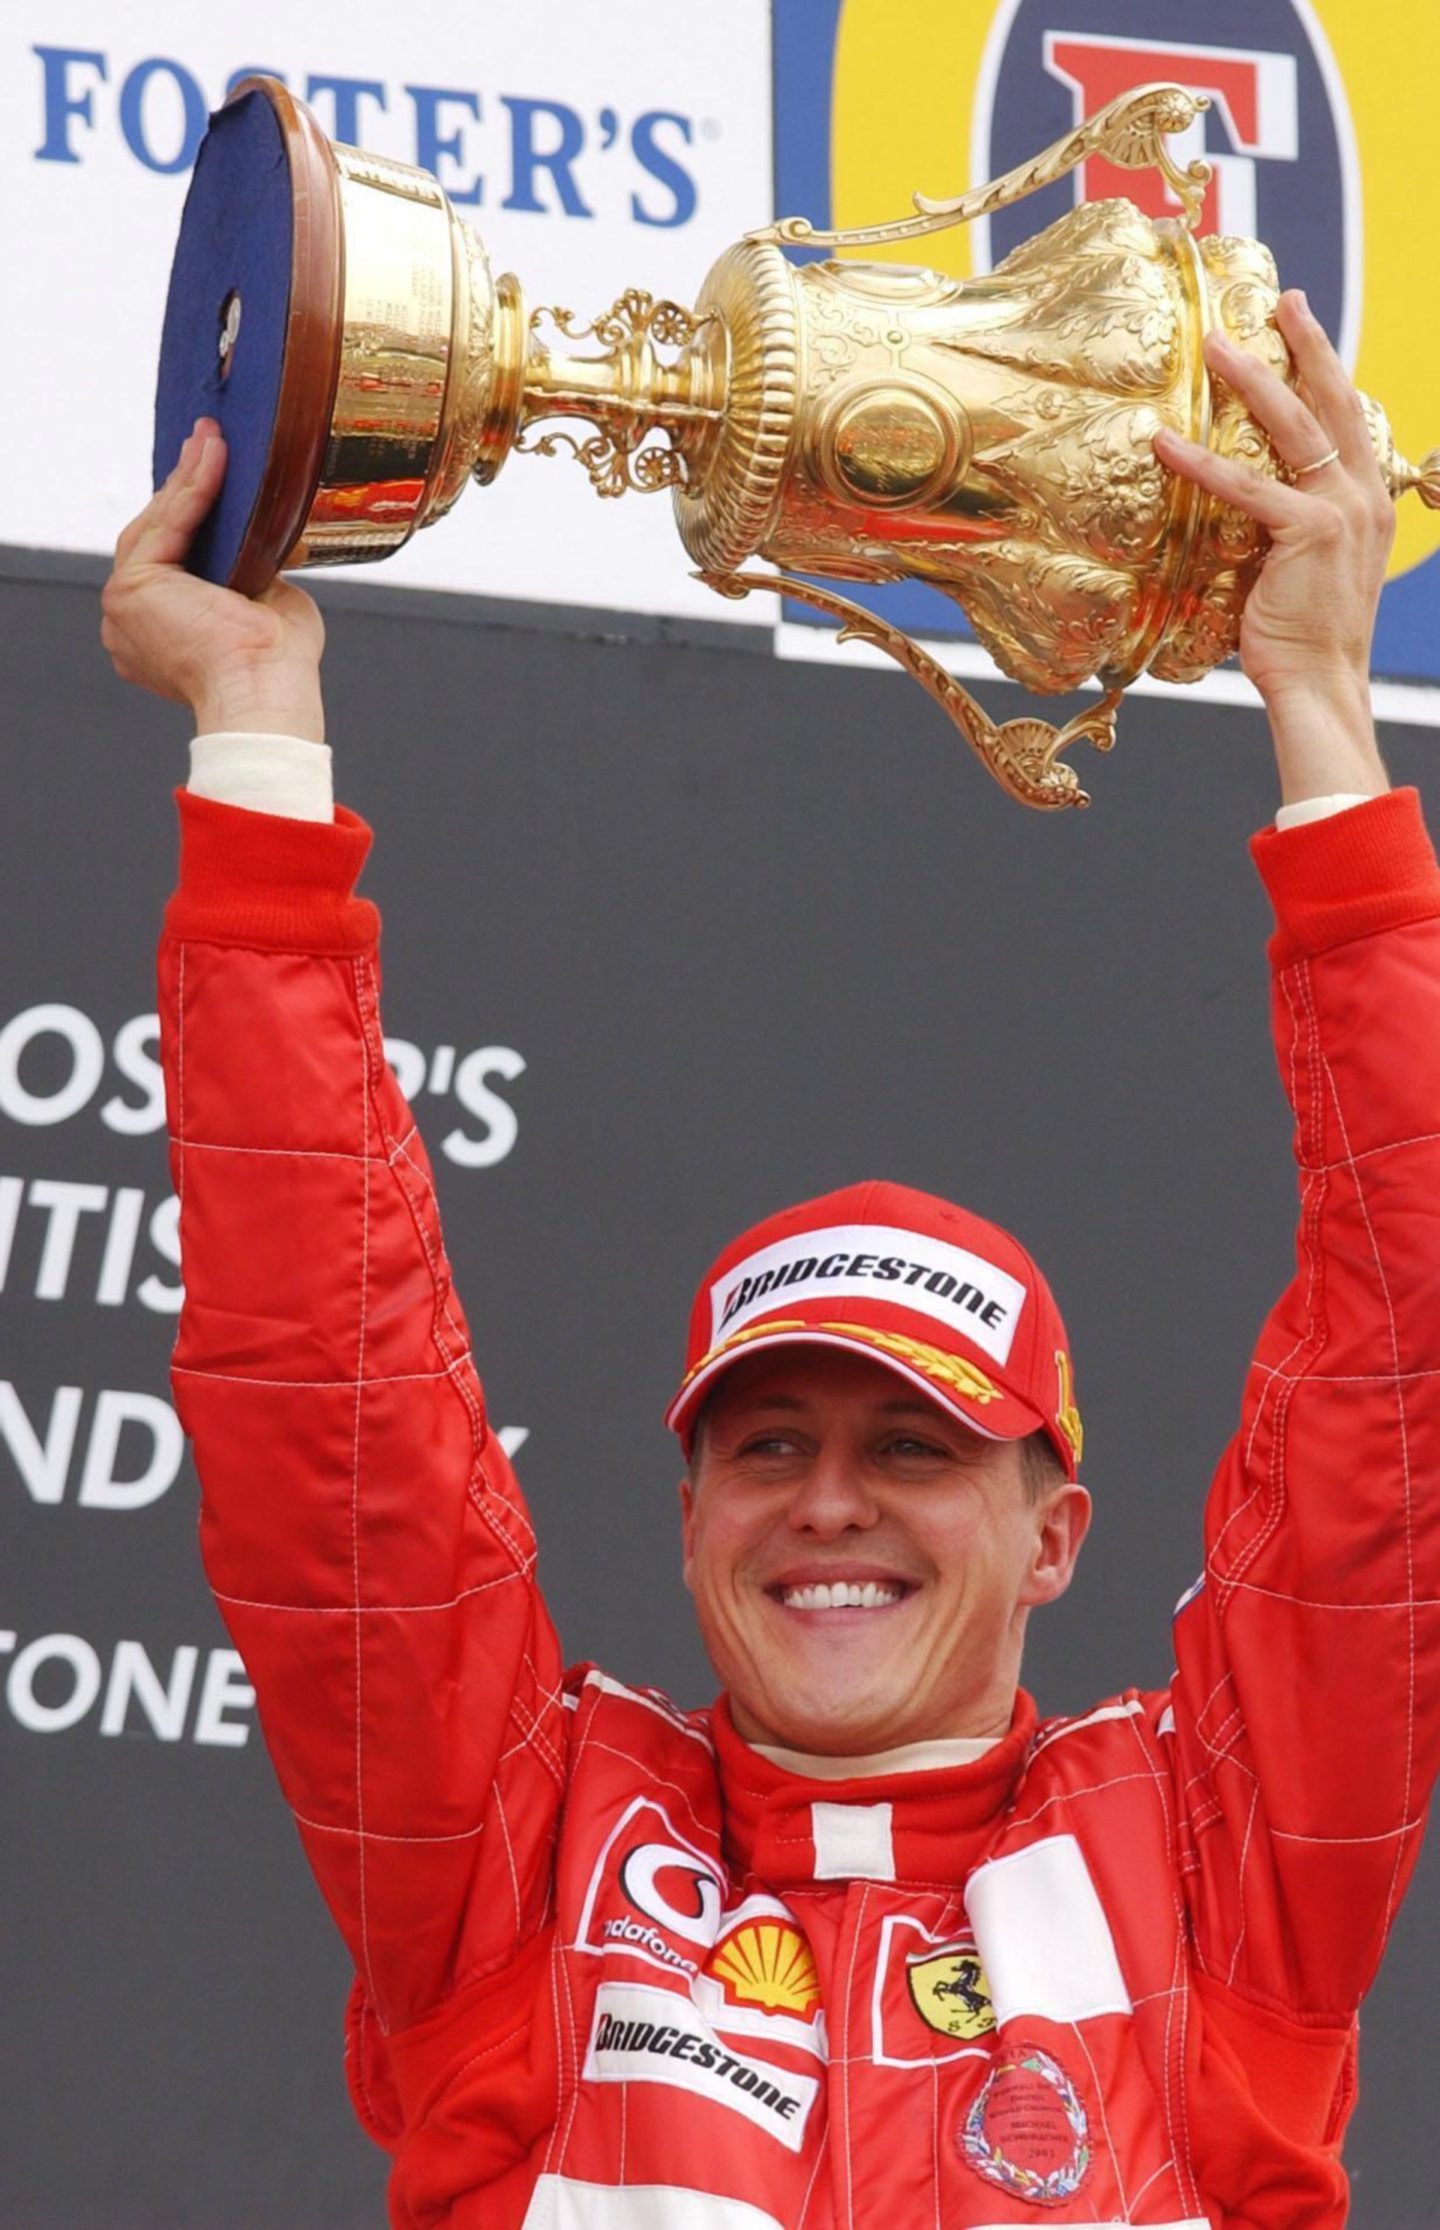 Michael Schumacher enjoyed unprecedented success in the late 1990s and early 2000s.